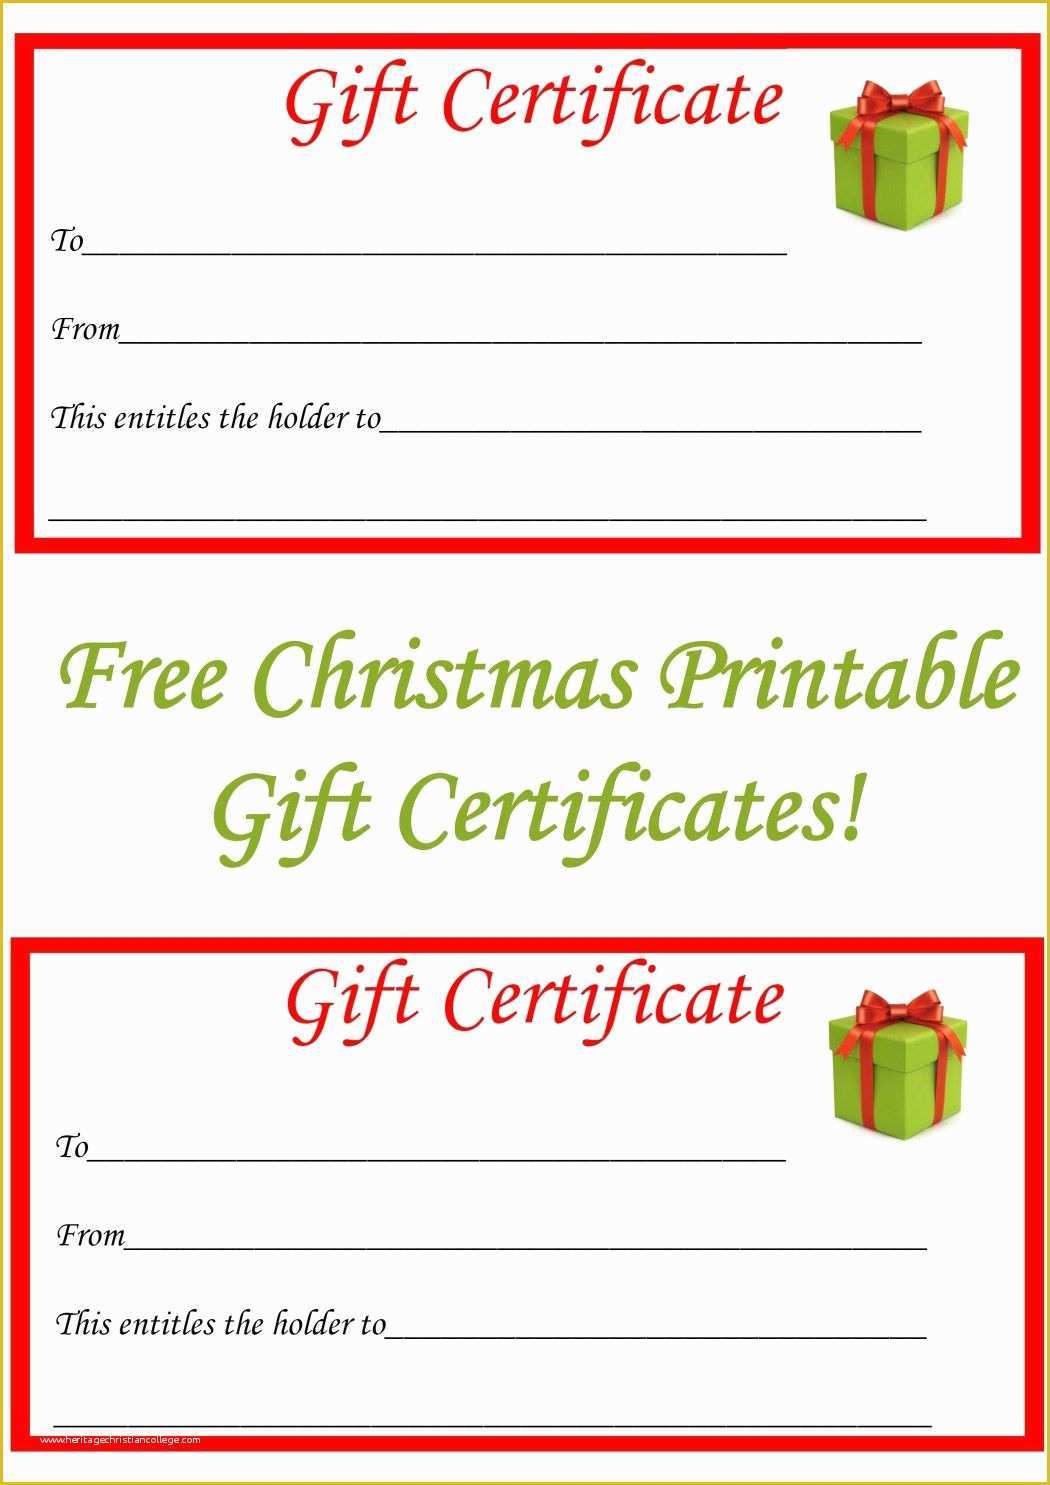 Free Download Gift Certificate Template Word Of Best 25 Printable T Certificates Ideas On Pinterest